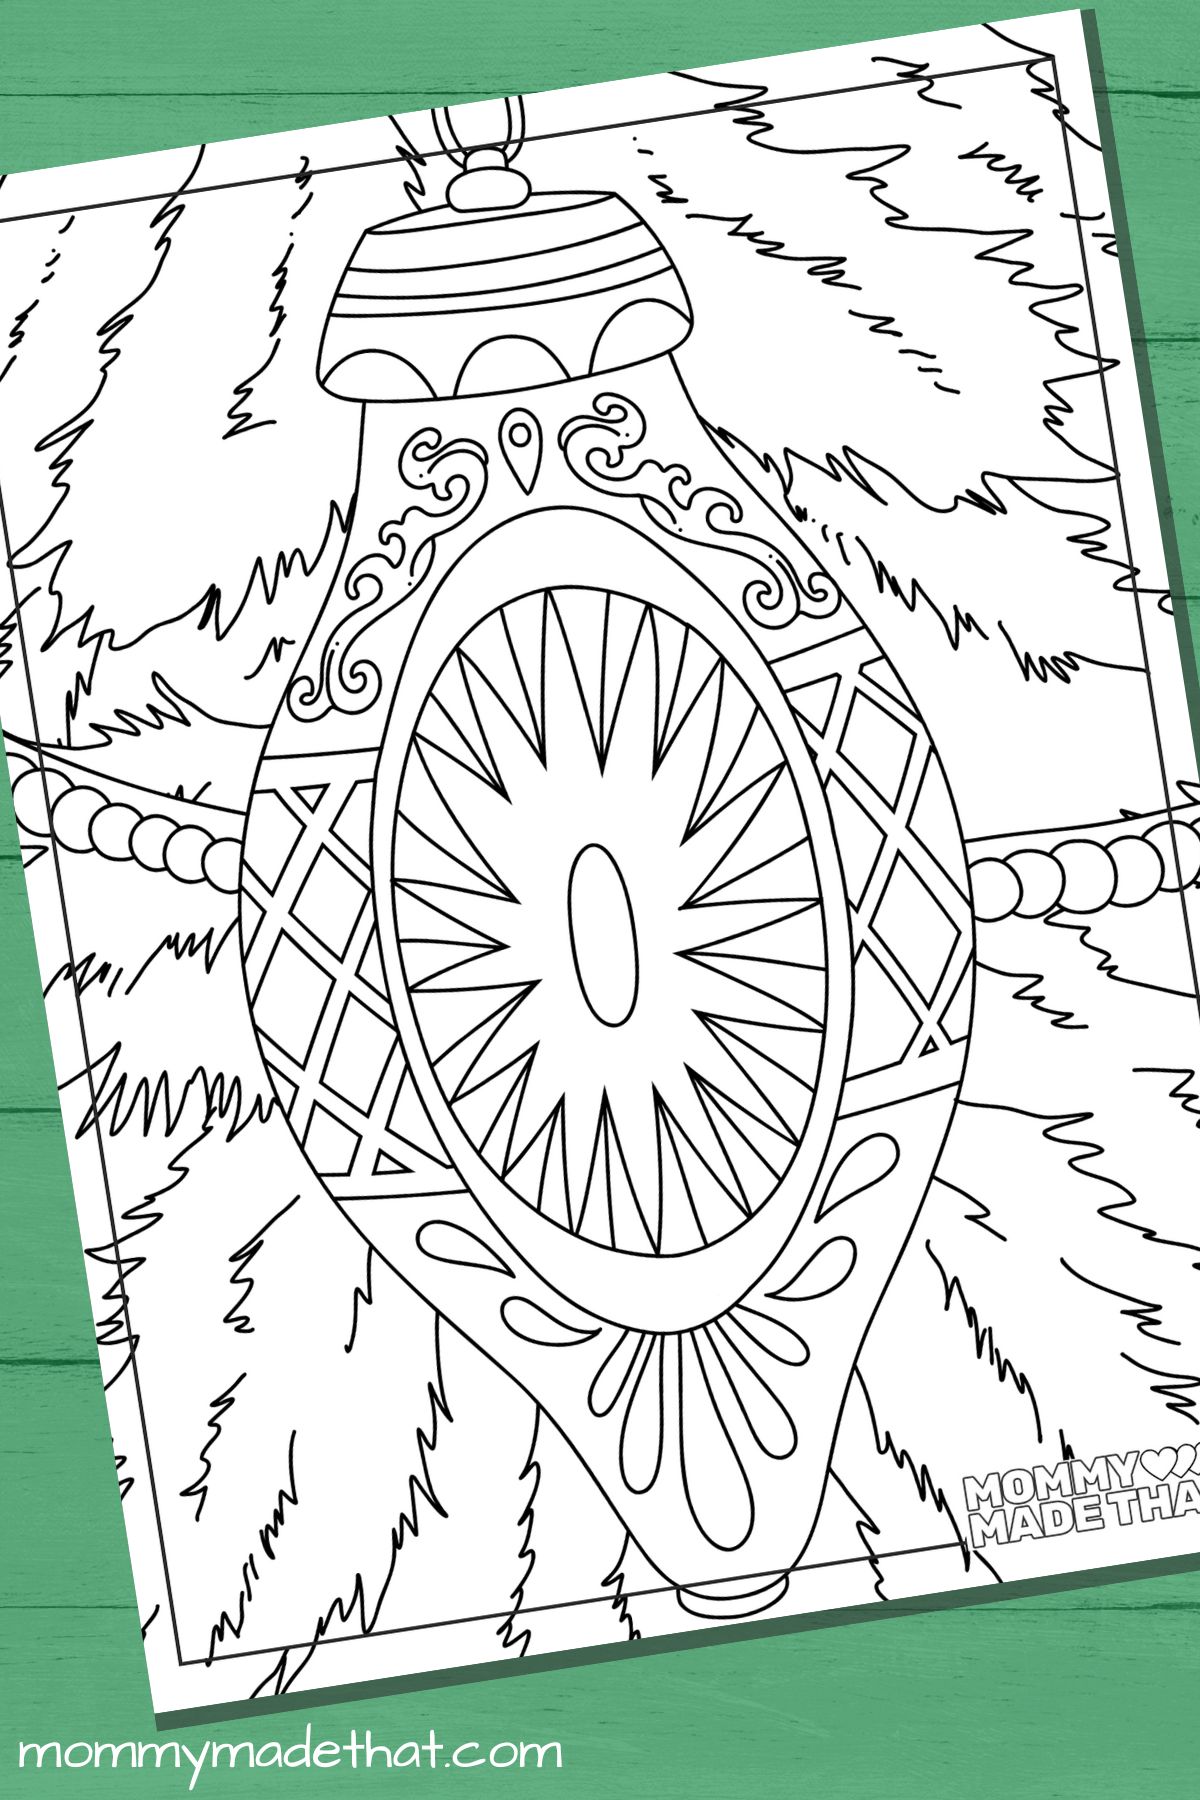 Vintage Christmas ornament coloring page